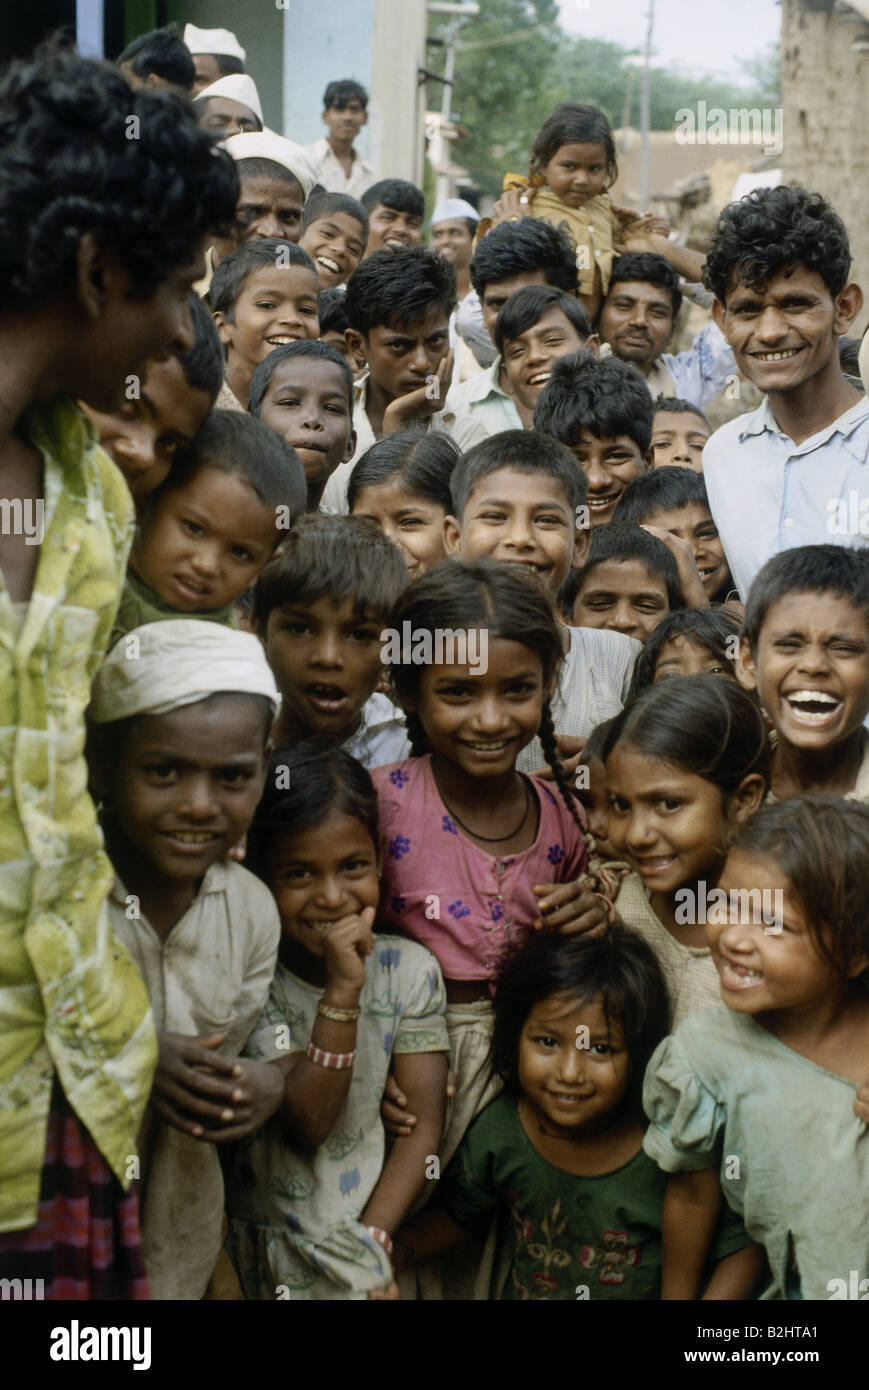 geography / travel, India, people, group picture of Indian children, Central India, , Stock Photo